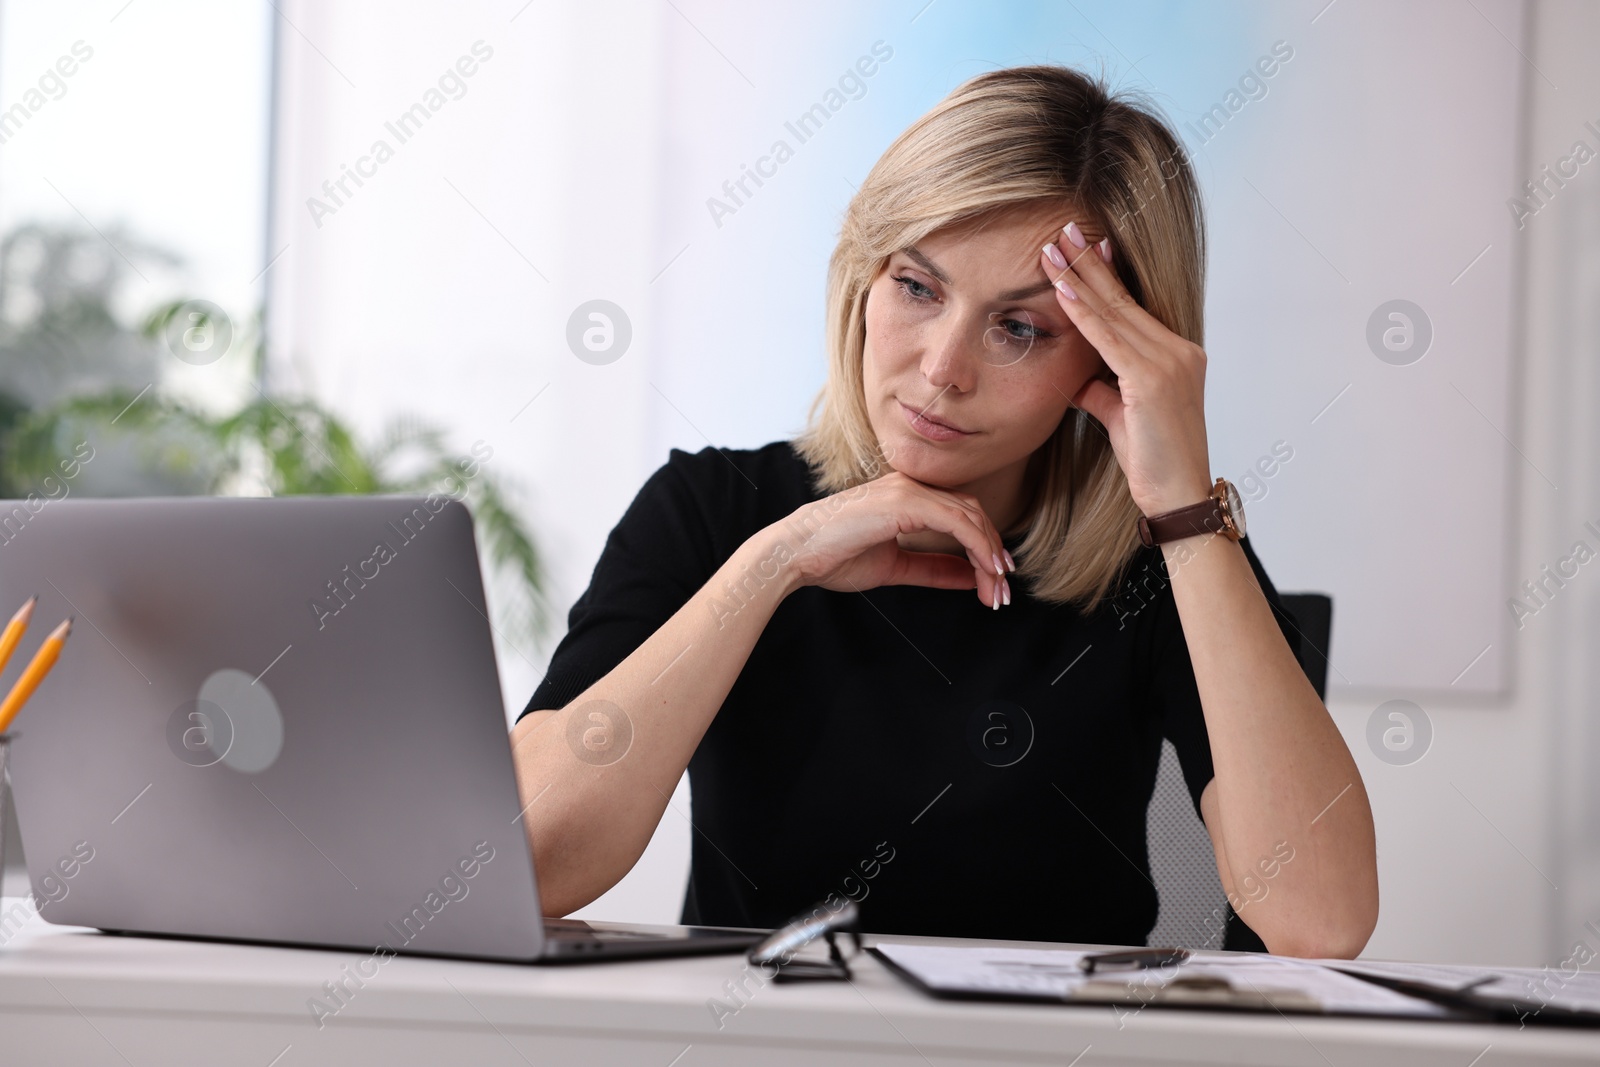 Photo of Overwhelmed woman sitting at table with laptop and documents in office